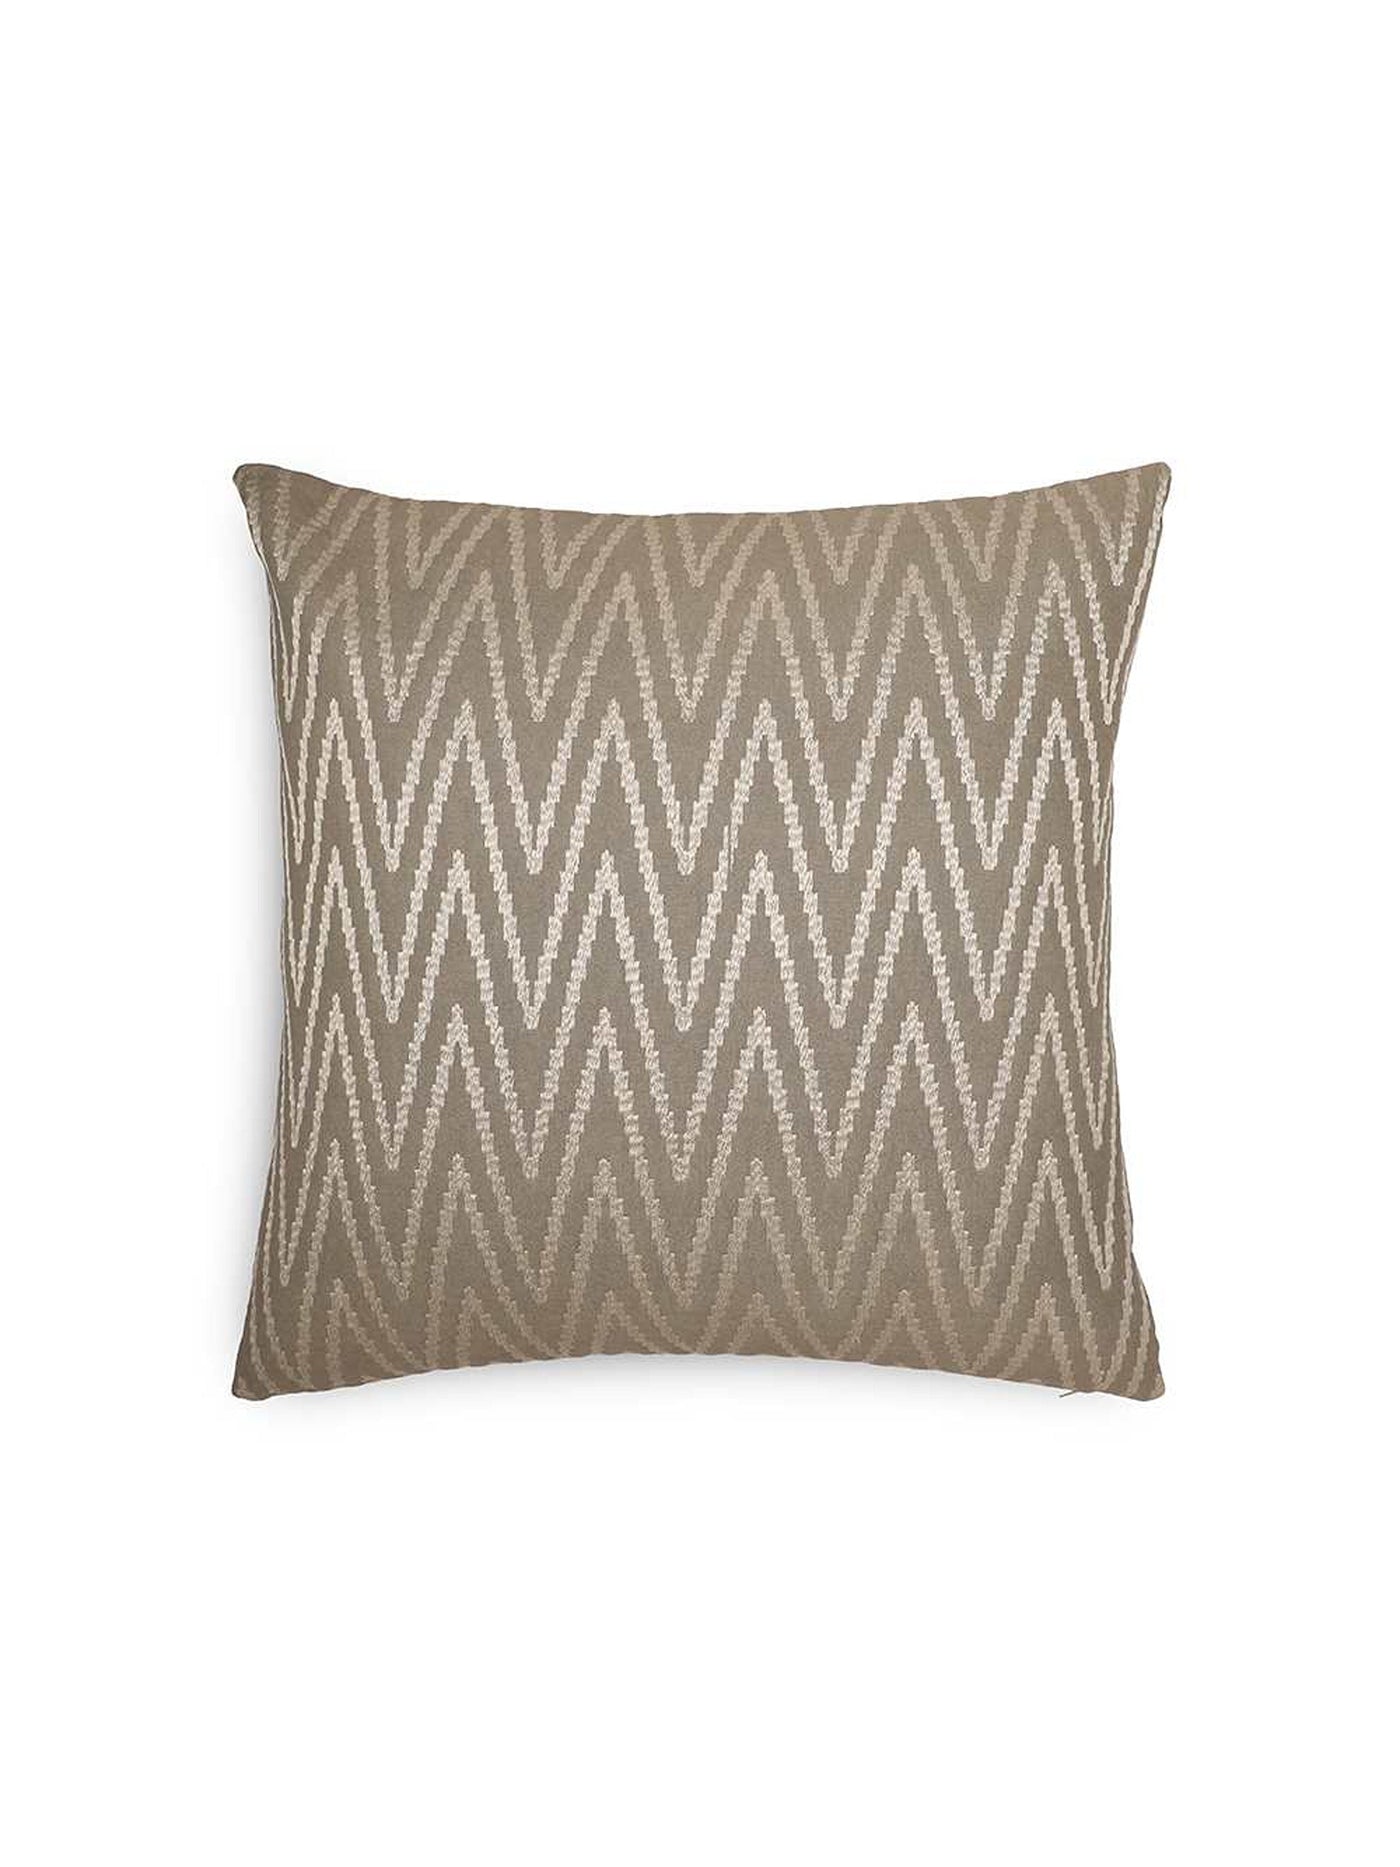 Cushion Cover - Meander Pewter